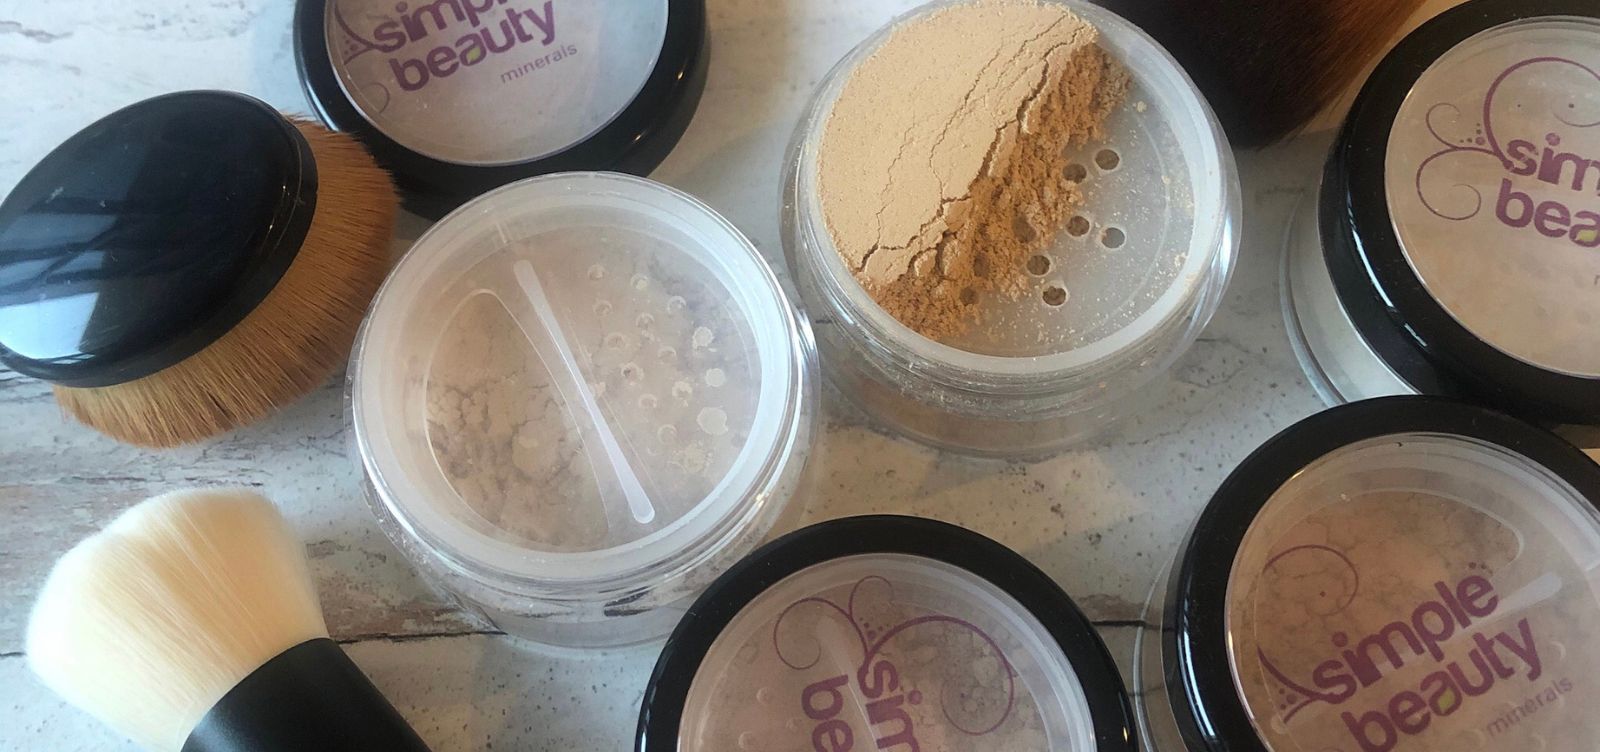 pots of mineral foundation, some open, with makeup brush.